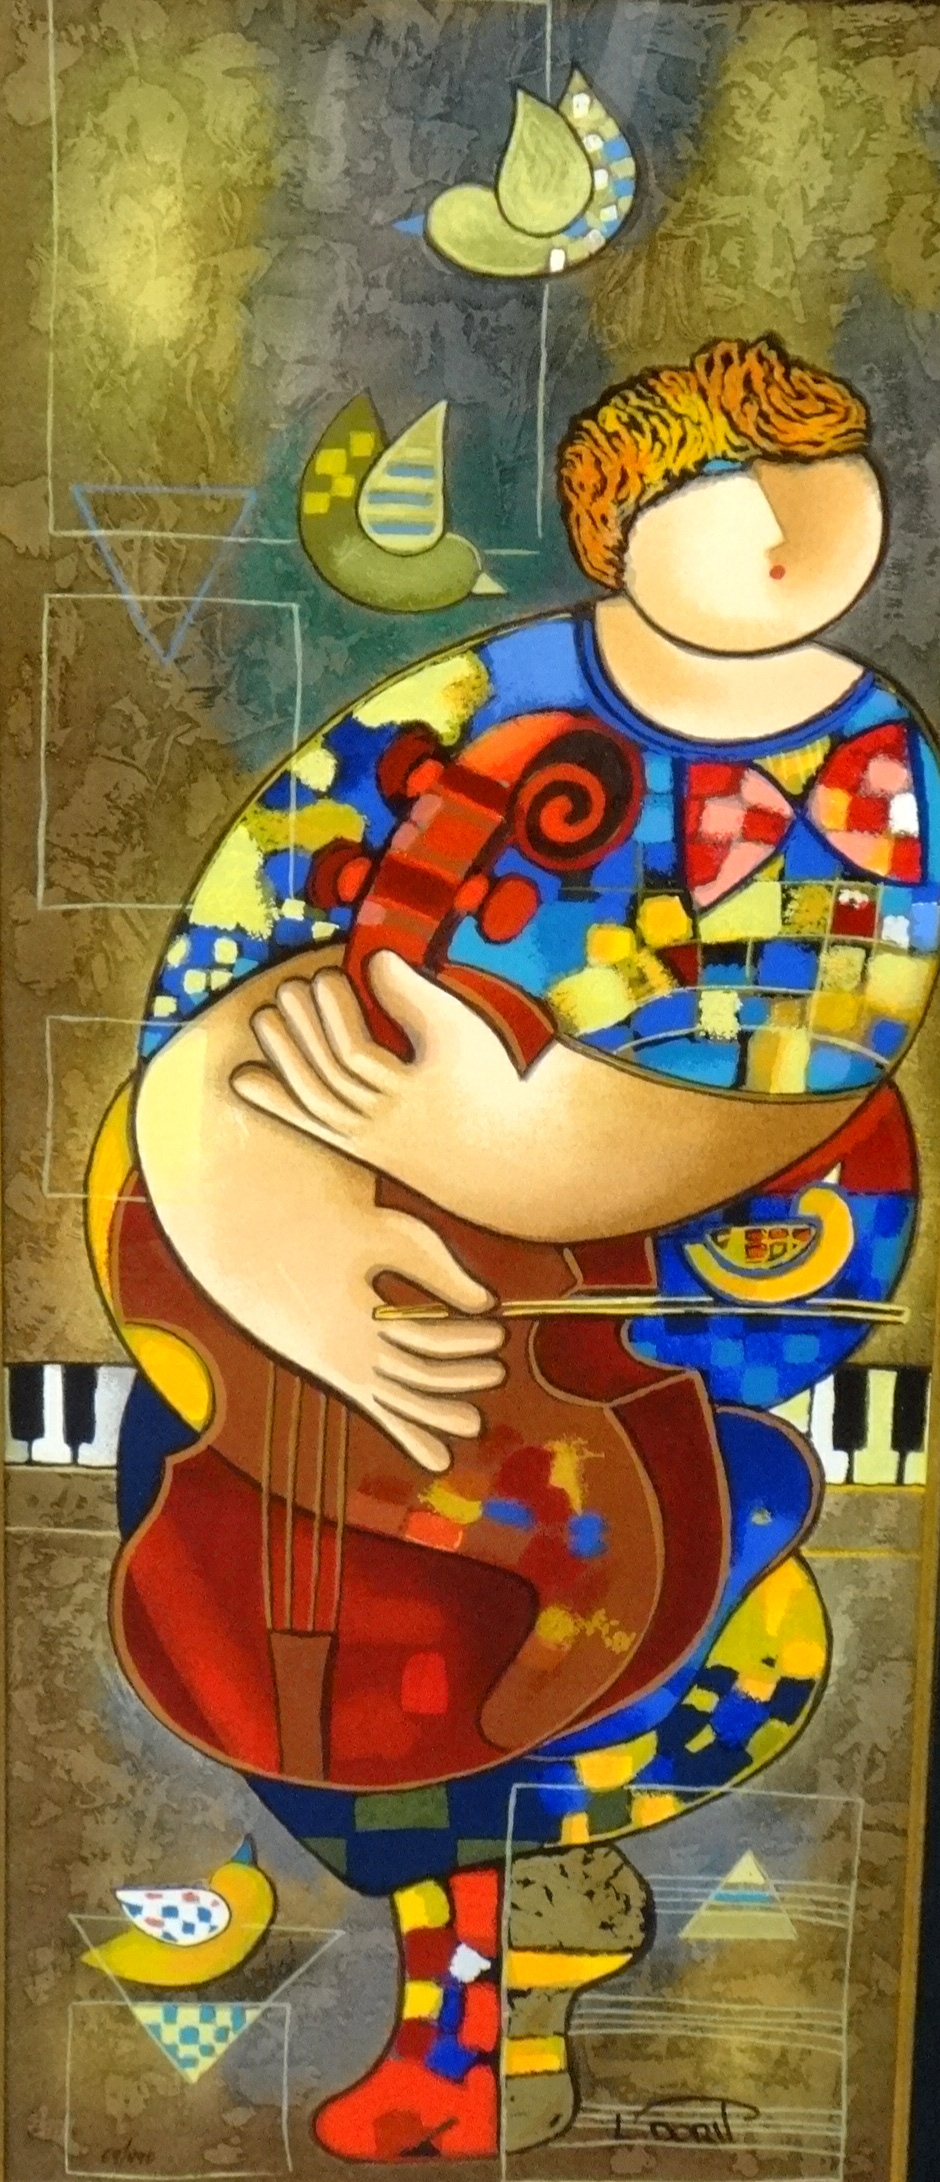 DORIT LEVI (born Israel, 1952) a limited edition signed serigraph, no 69/490, overall size 102cm x